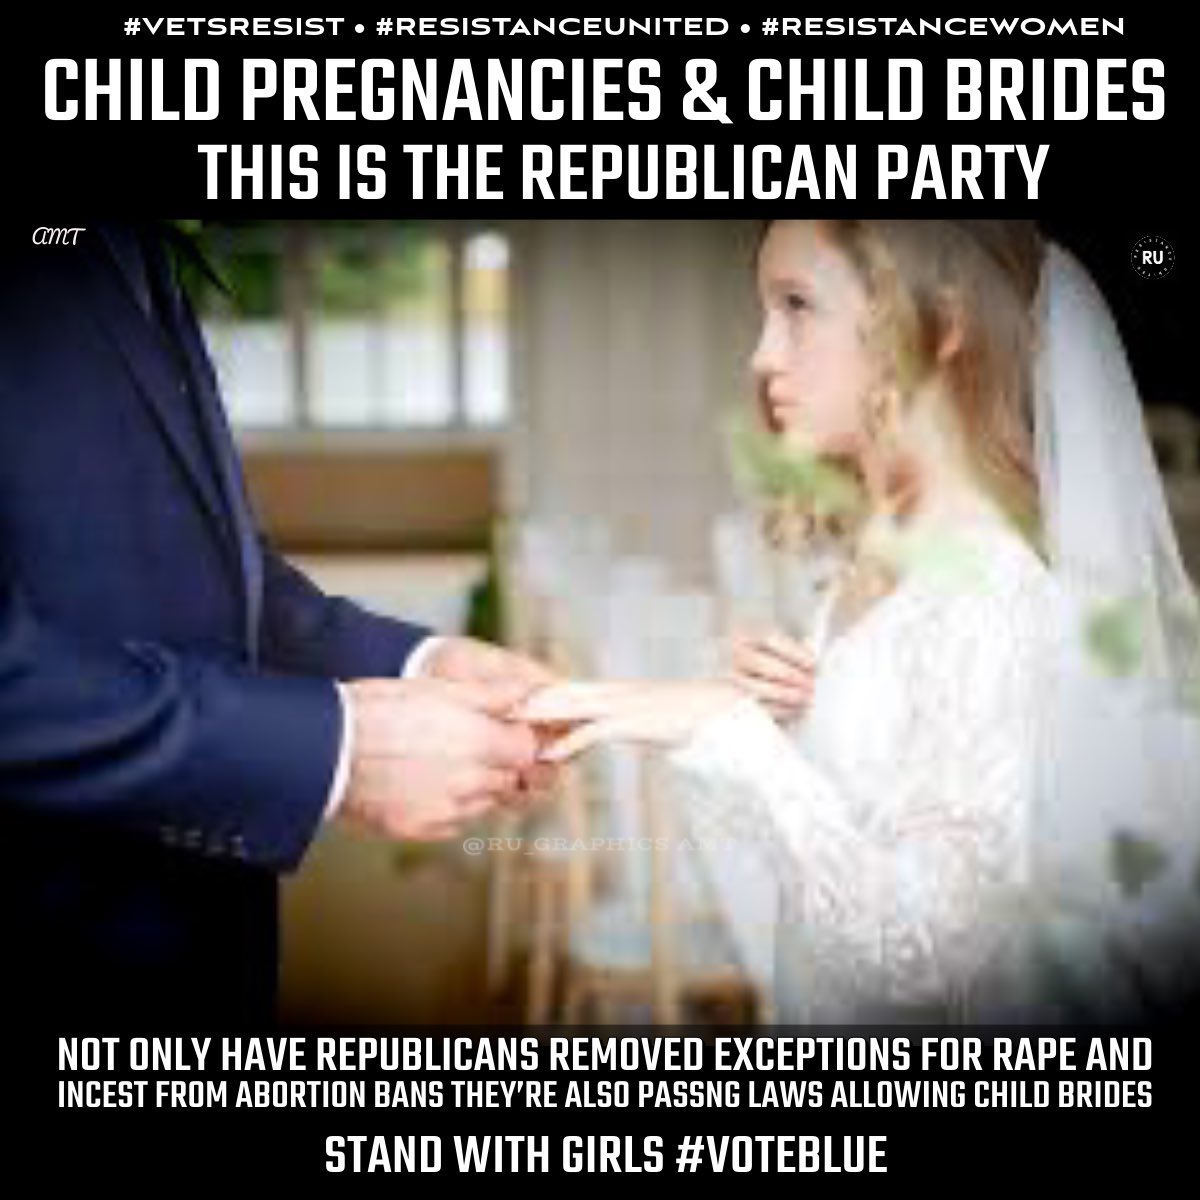 #DemVoice1 #DemsUnited I’ve never been okay with the idea of little GIRLS getting married to MEN!! It wasn’t okay in the “olden days” and it sure as hell isn’t okay now. I don’t care if it WAS normalized back then, it’s just wrong! PERIOD! Republicans have lost their damn minds…